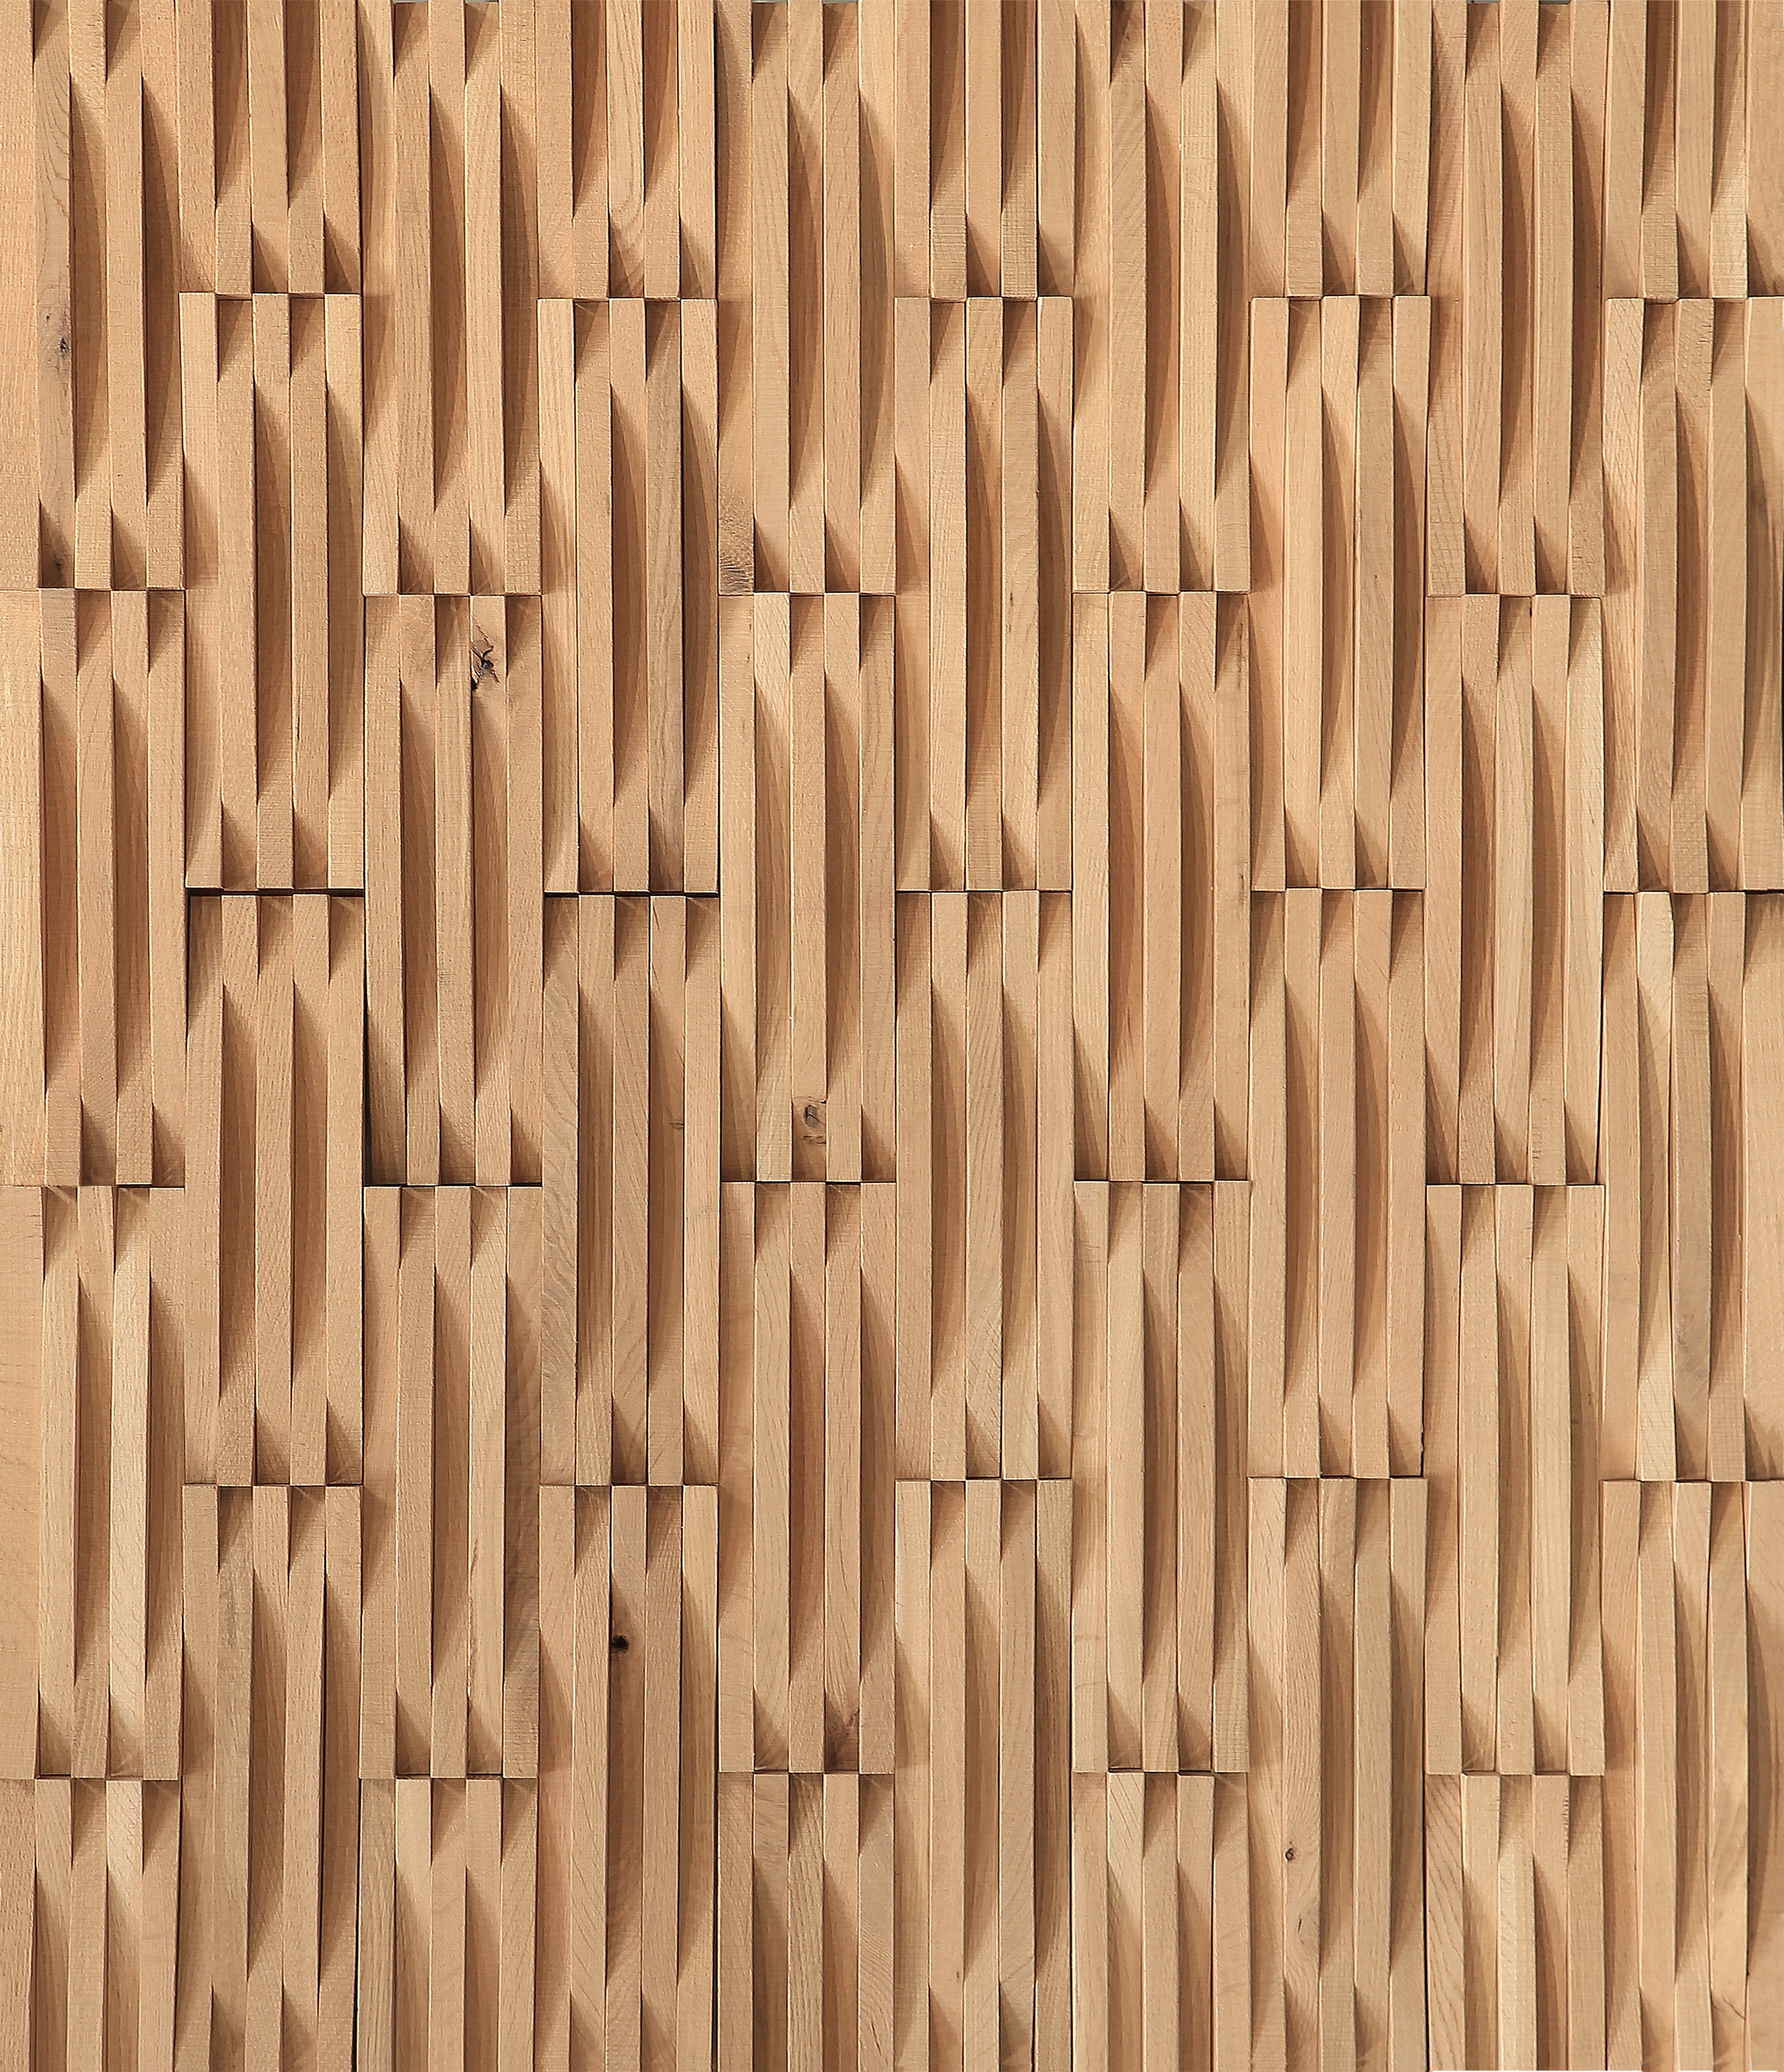 duchateau inceptiv curva sand oak three dimensional wall natural wood panel lacquer for interior use distributed by surface group international